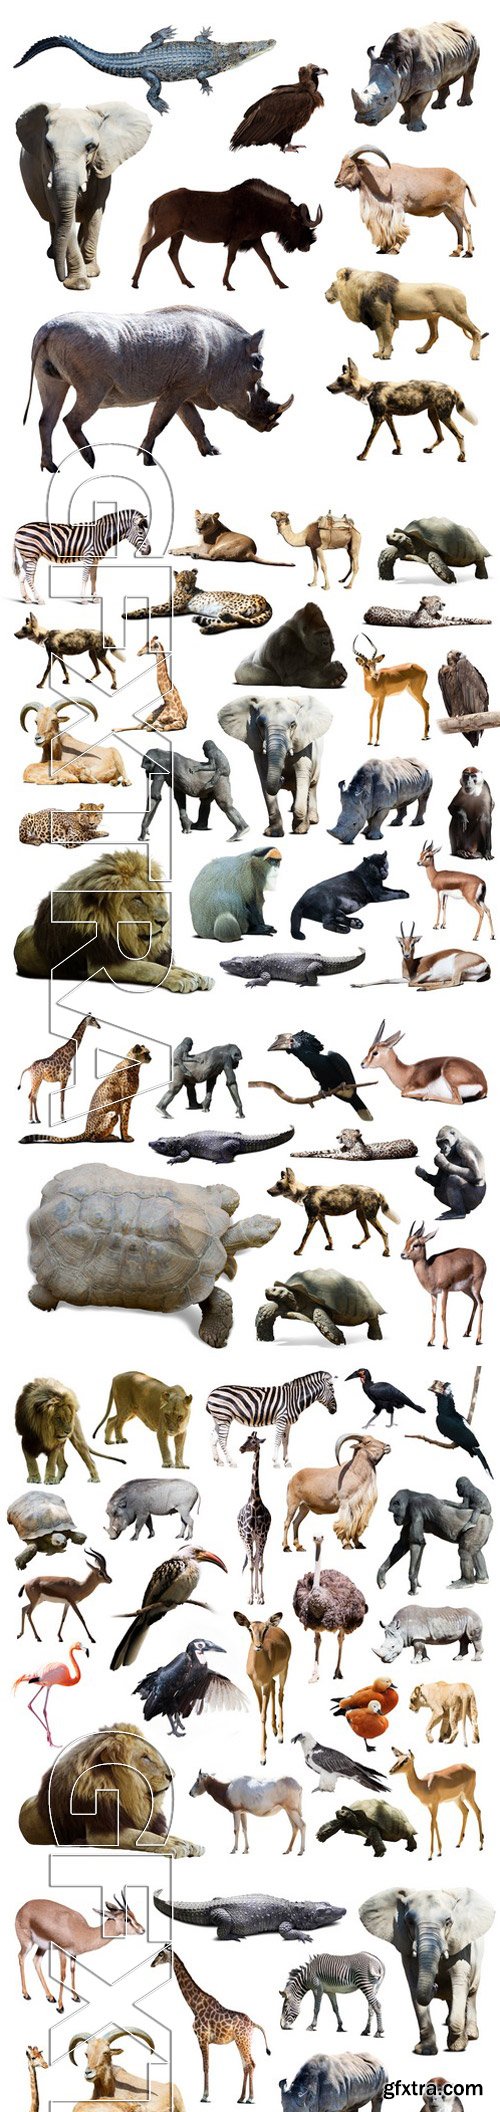 Stock Photos - Different African Animals 9